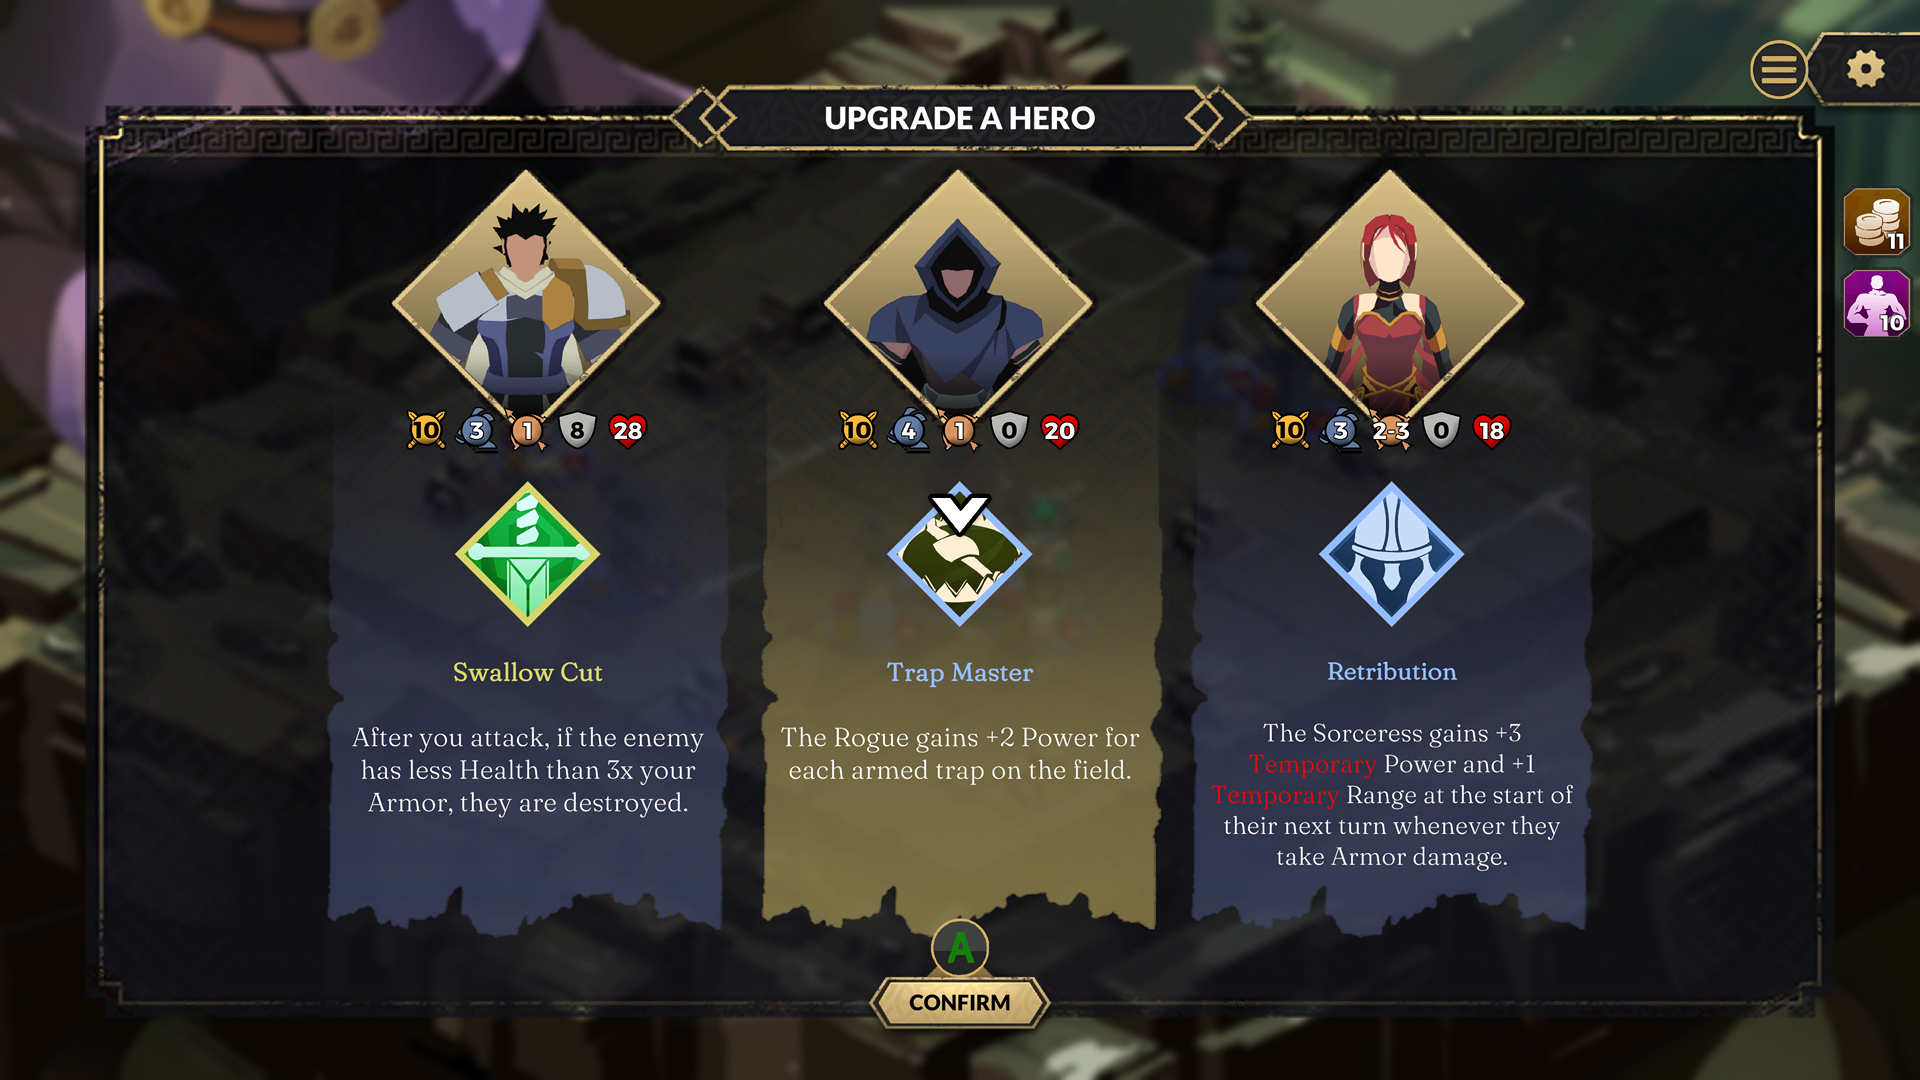 Three columns are on the screen, each hero has a separate one. The screen is the upgrade a hero screen. Swallow cut, trap master and retribution are listed with a confirm option at the bottom of the screen. 